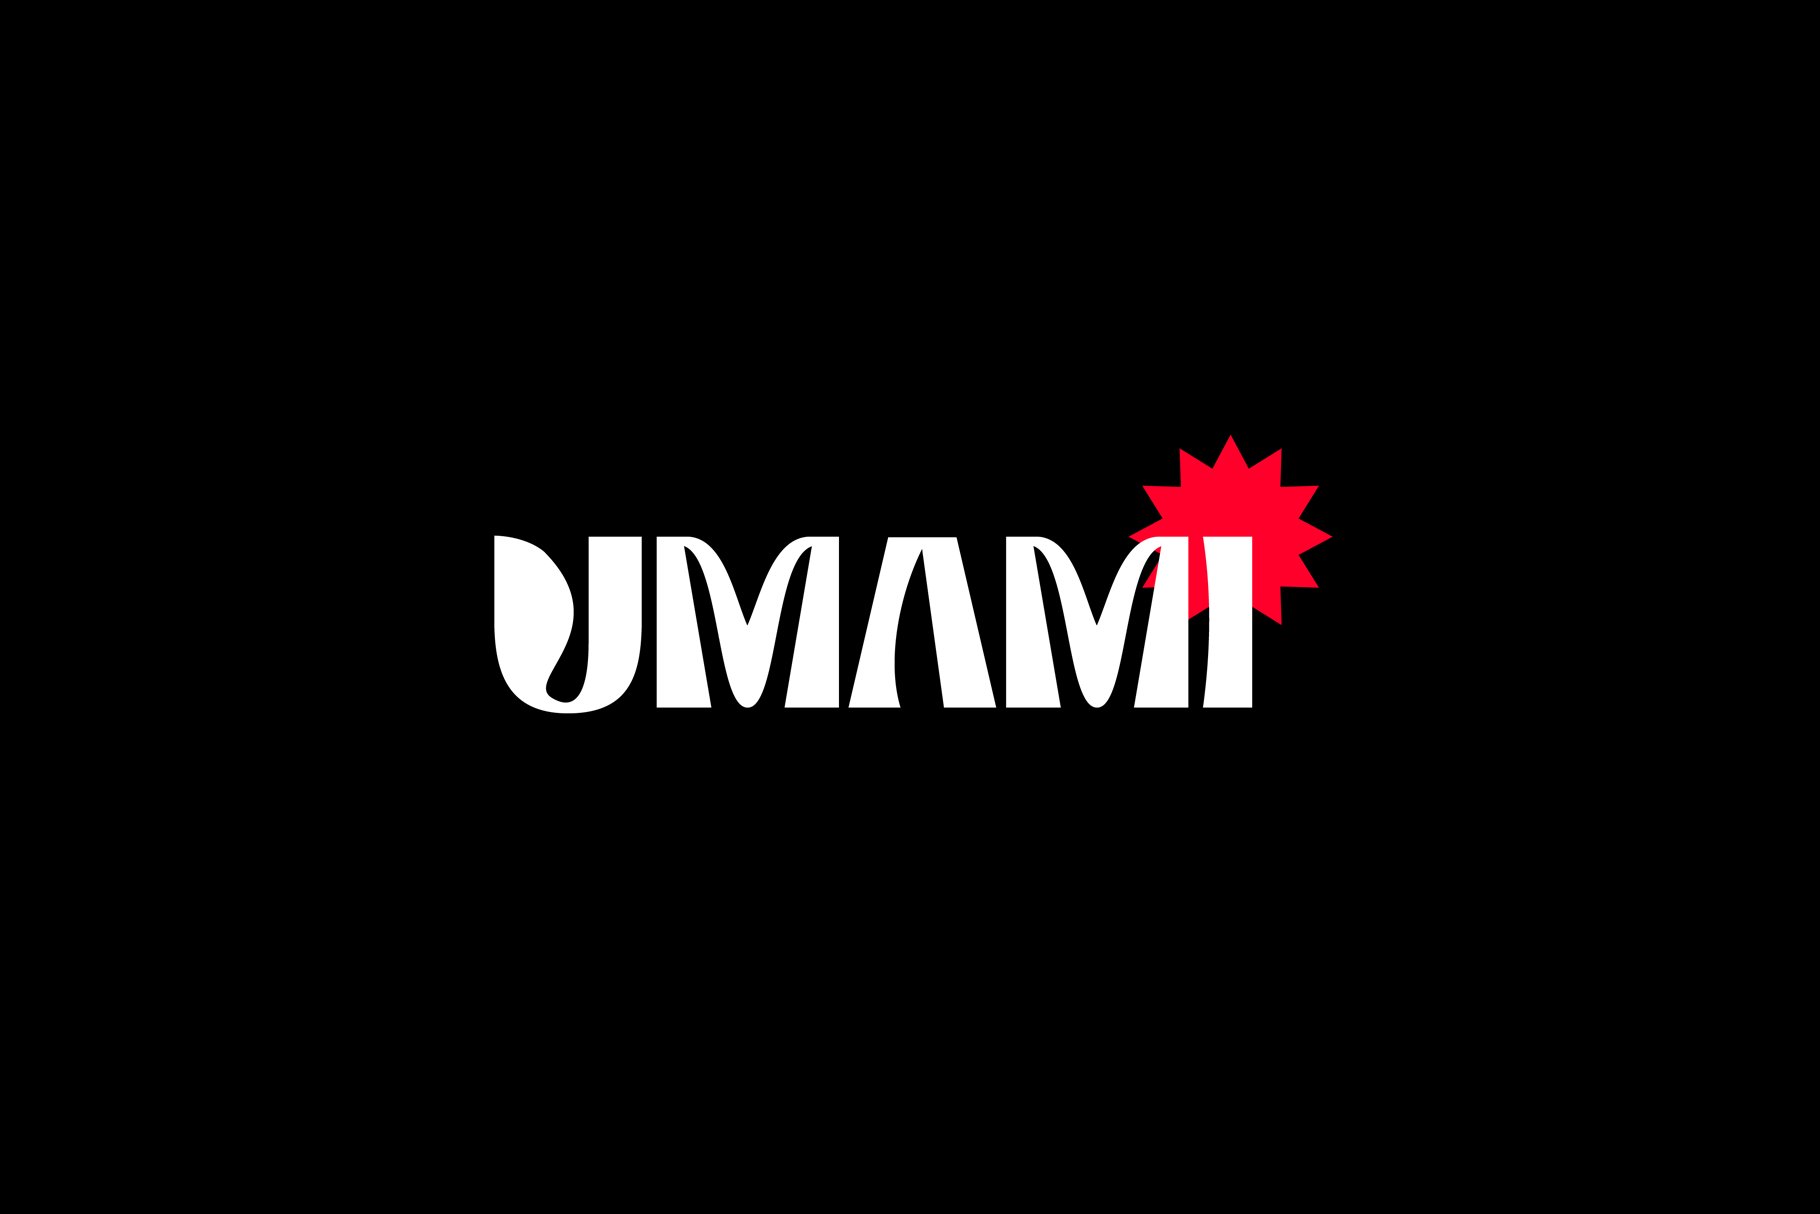 Umami - A Delicious typeface cover image.